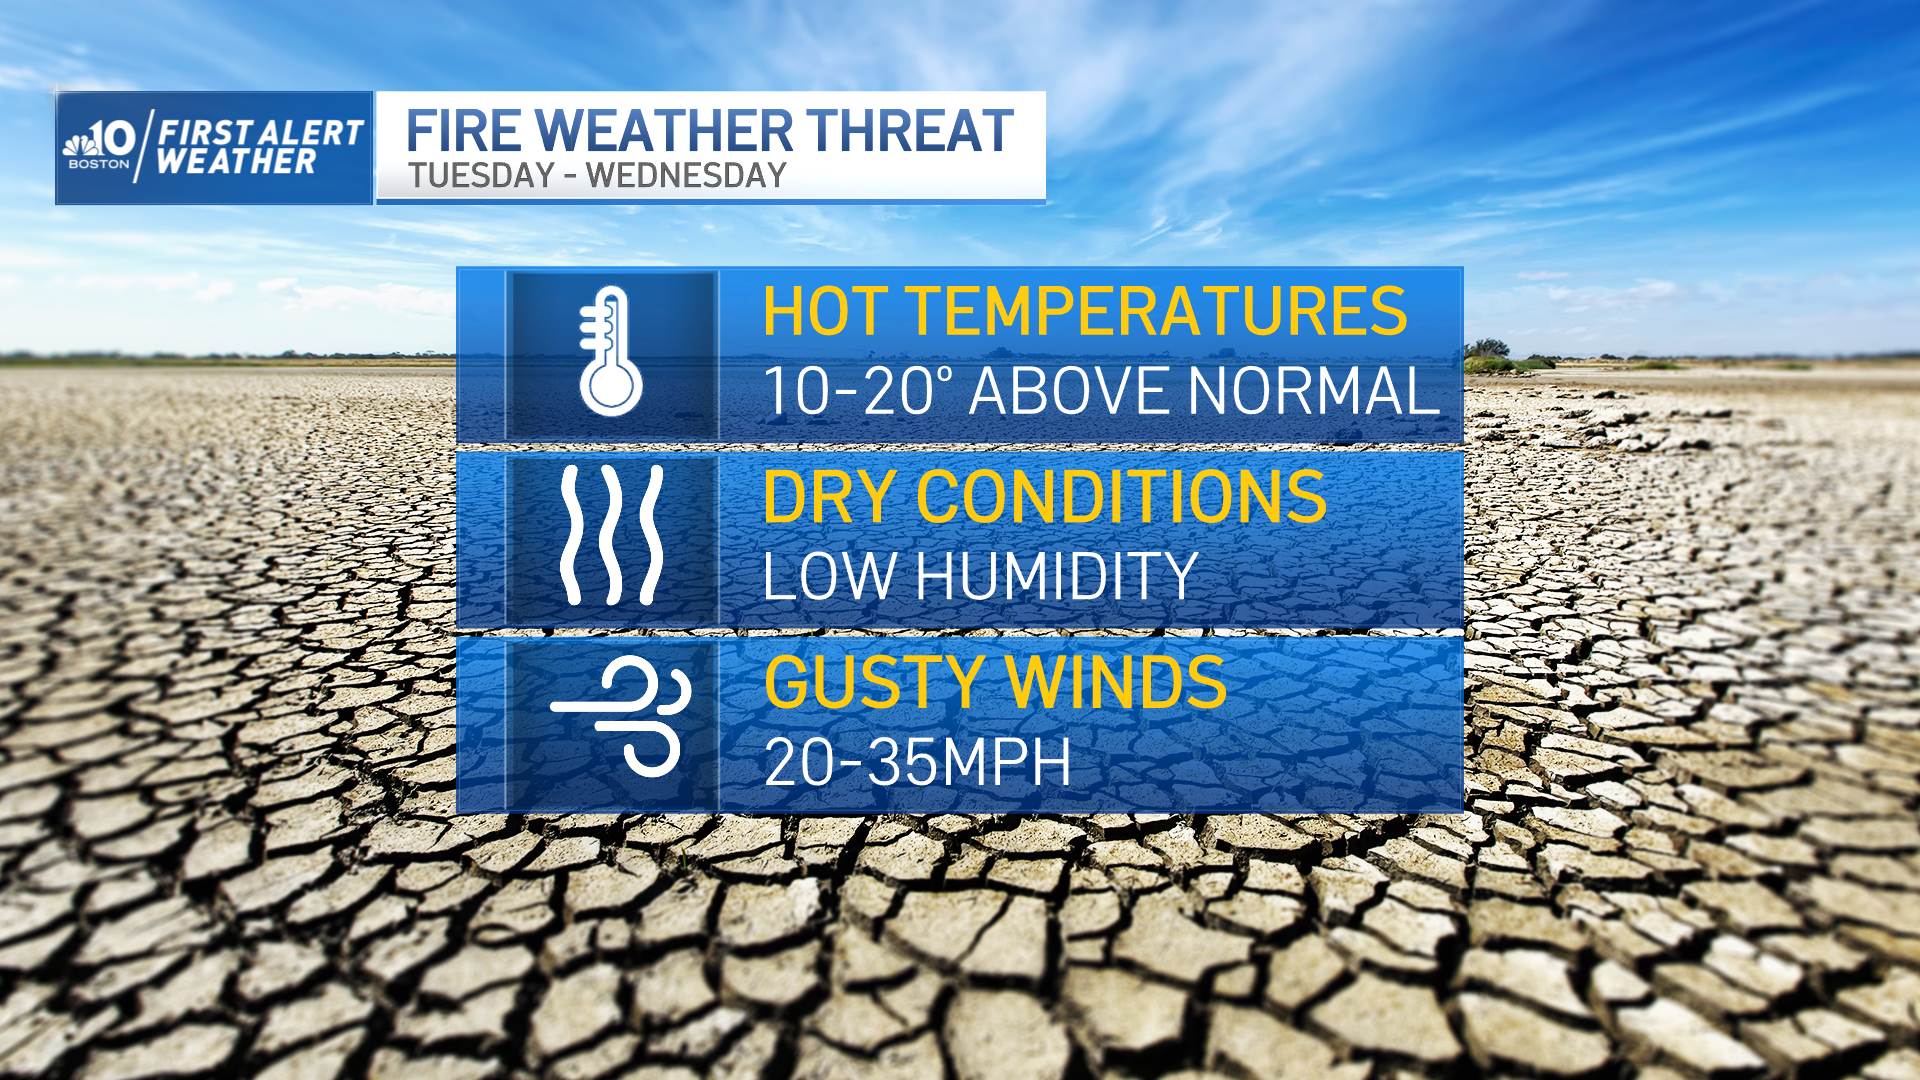 A graphic showing the what causes a fire weather threat: temperatures 10-20 degrees above normal, dry conditions with low humidity and gusty winds from 20-35 mph